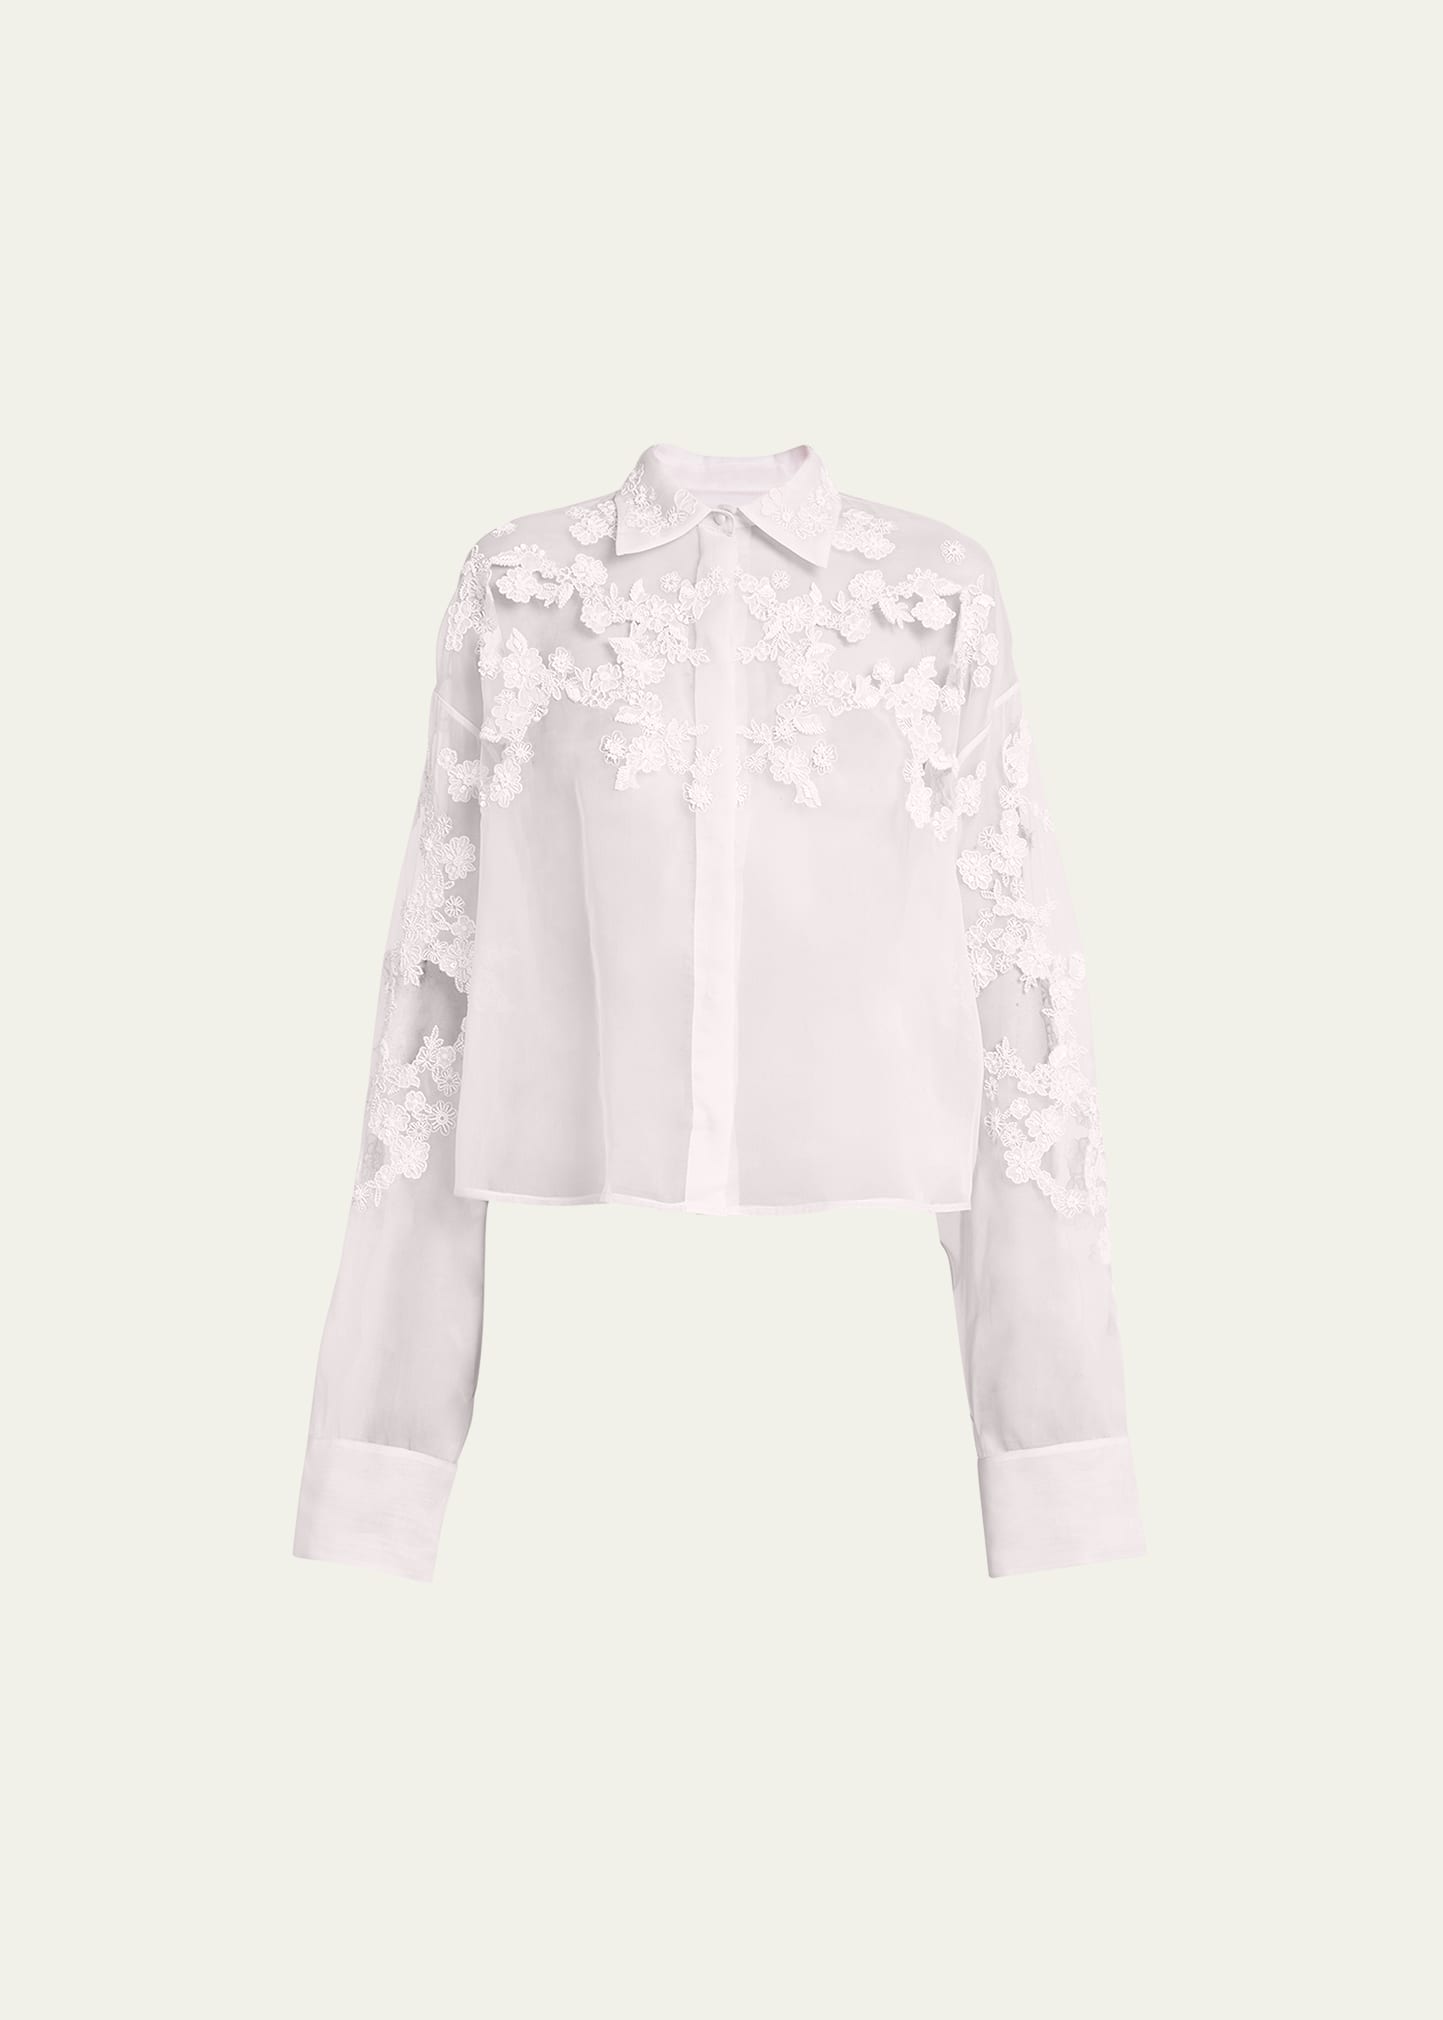 VALENTINO SHEER LACE EMBROIDERED BUTTON-FRONT BLOUSE